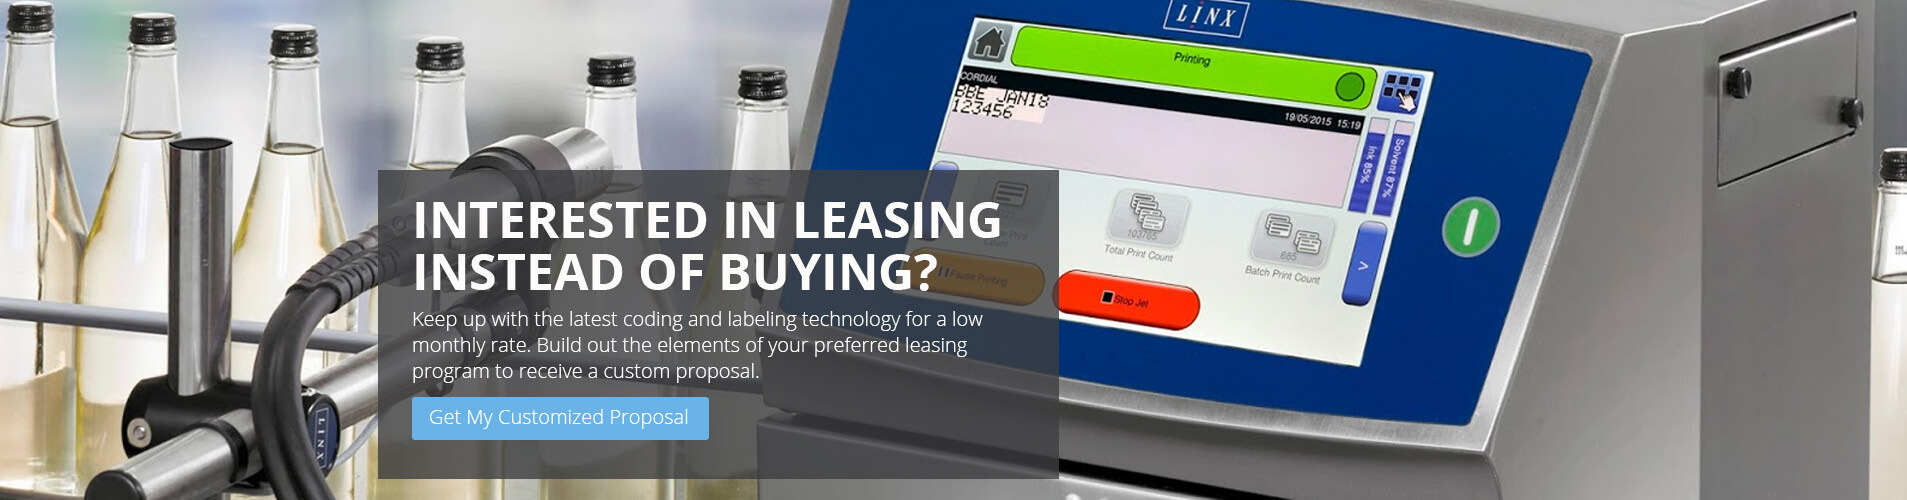 leasing options for industrial printers, industrial coding, industrial printing, automated labeling systems